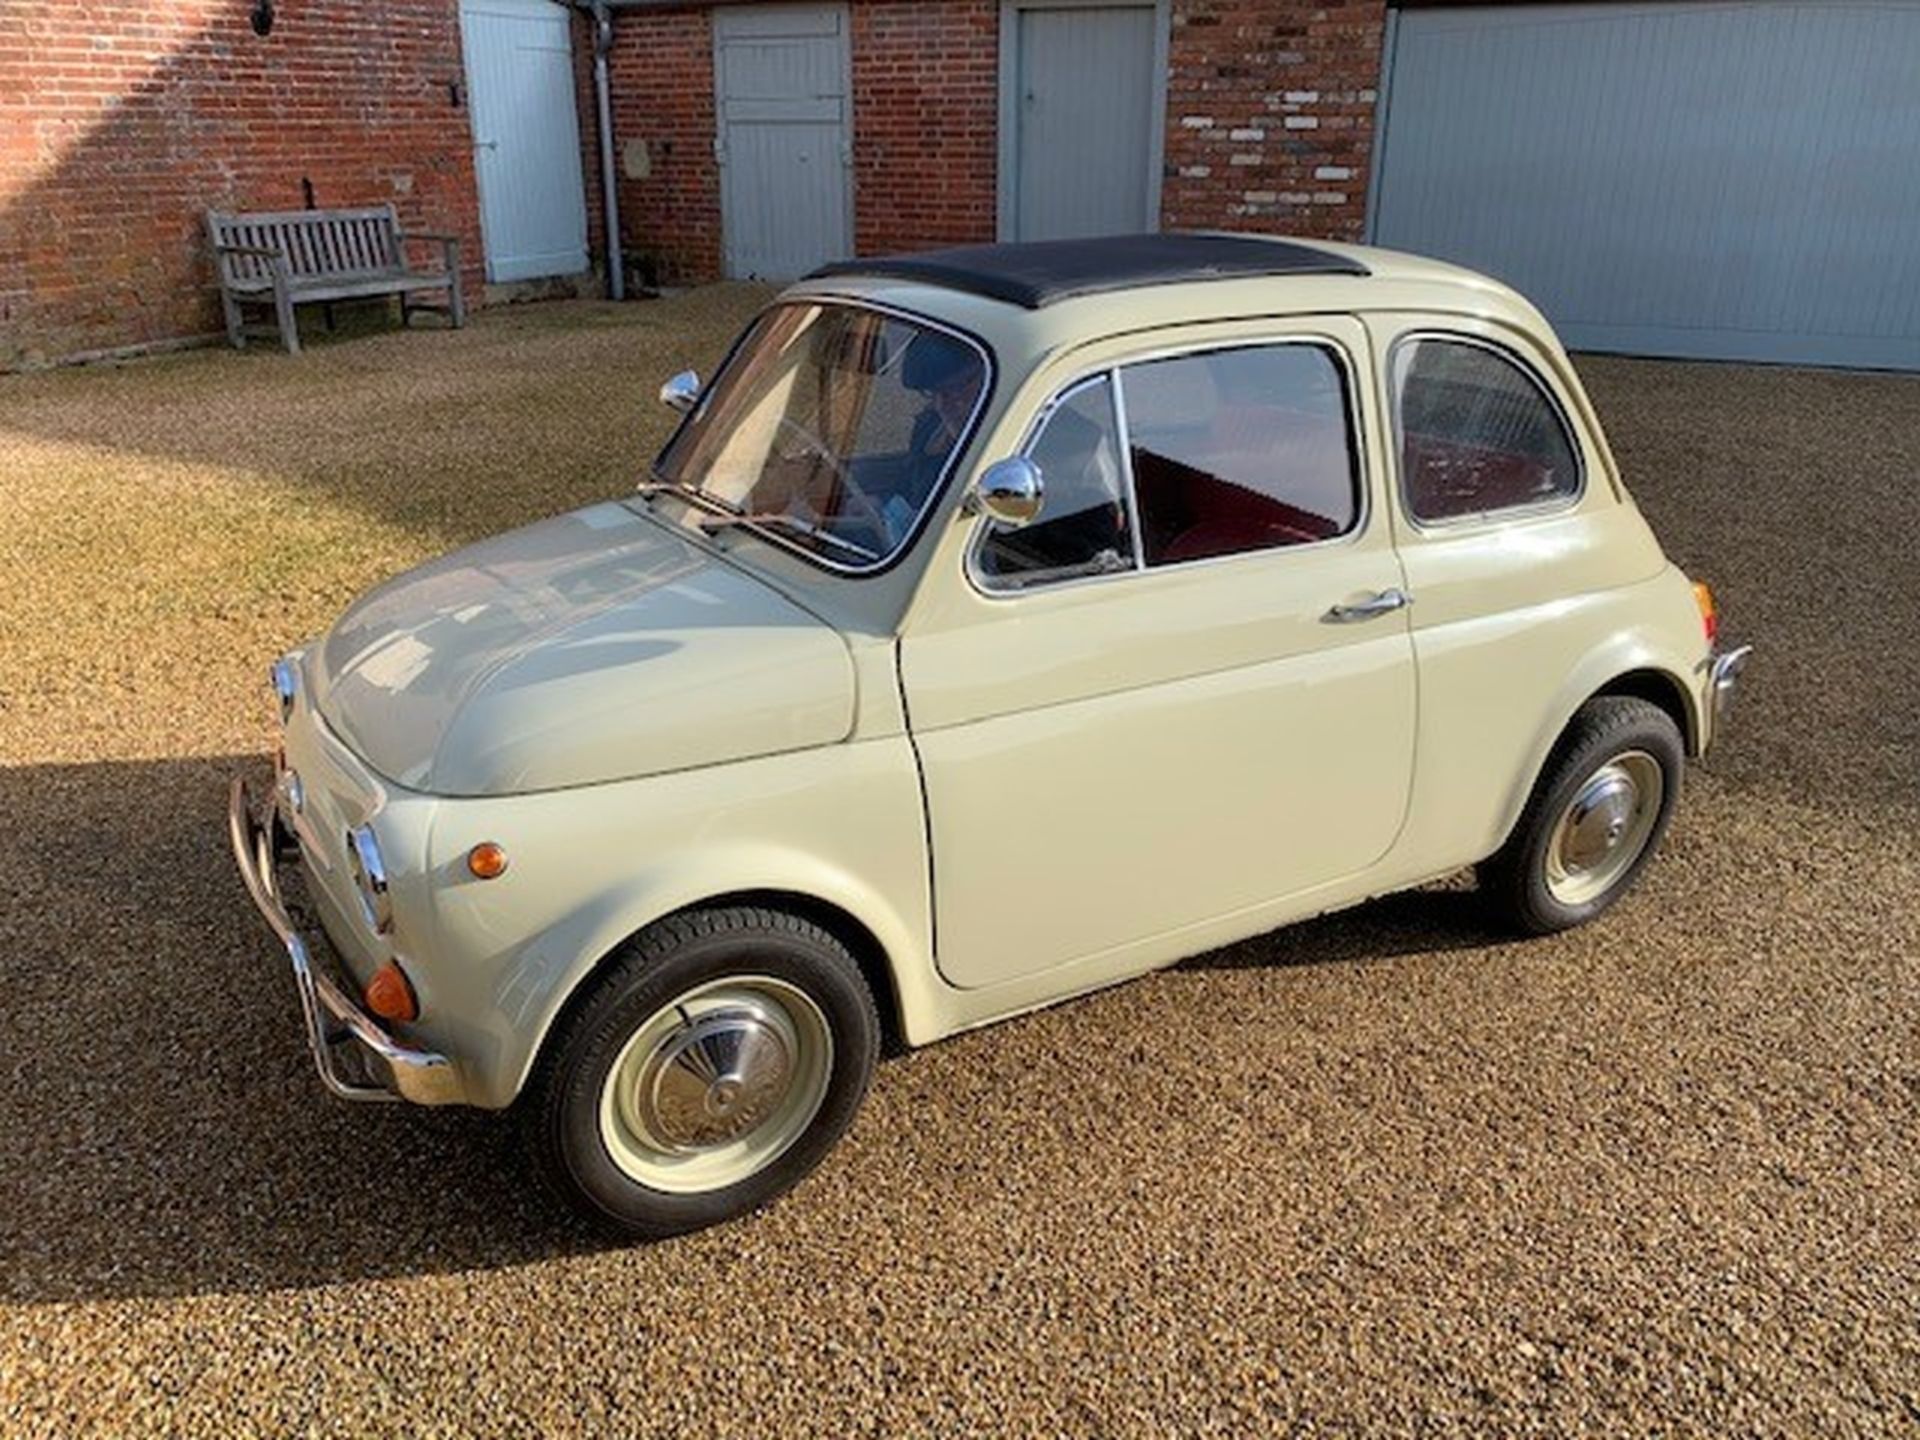 1971 Fiat 500L Chassis no. 2836624